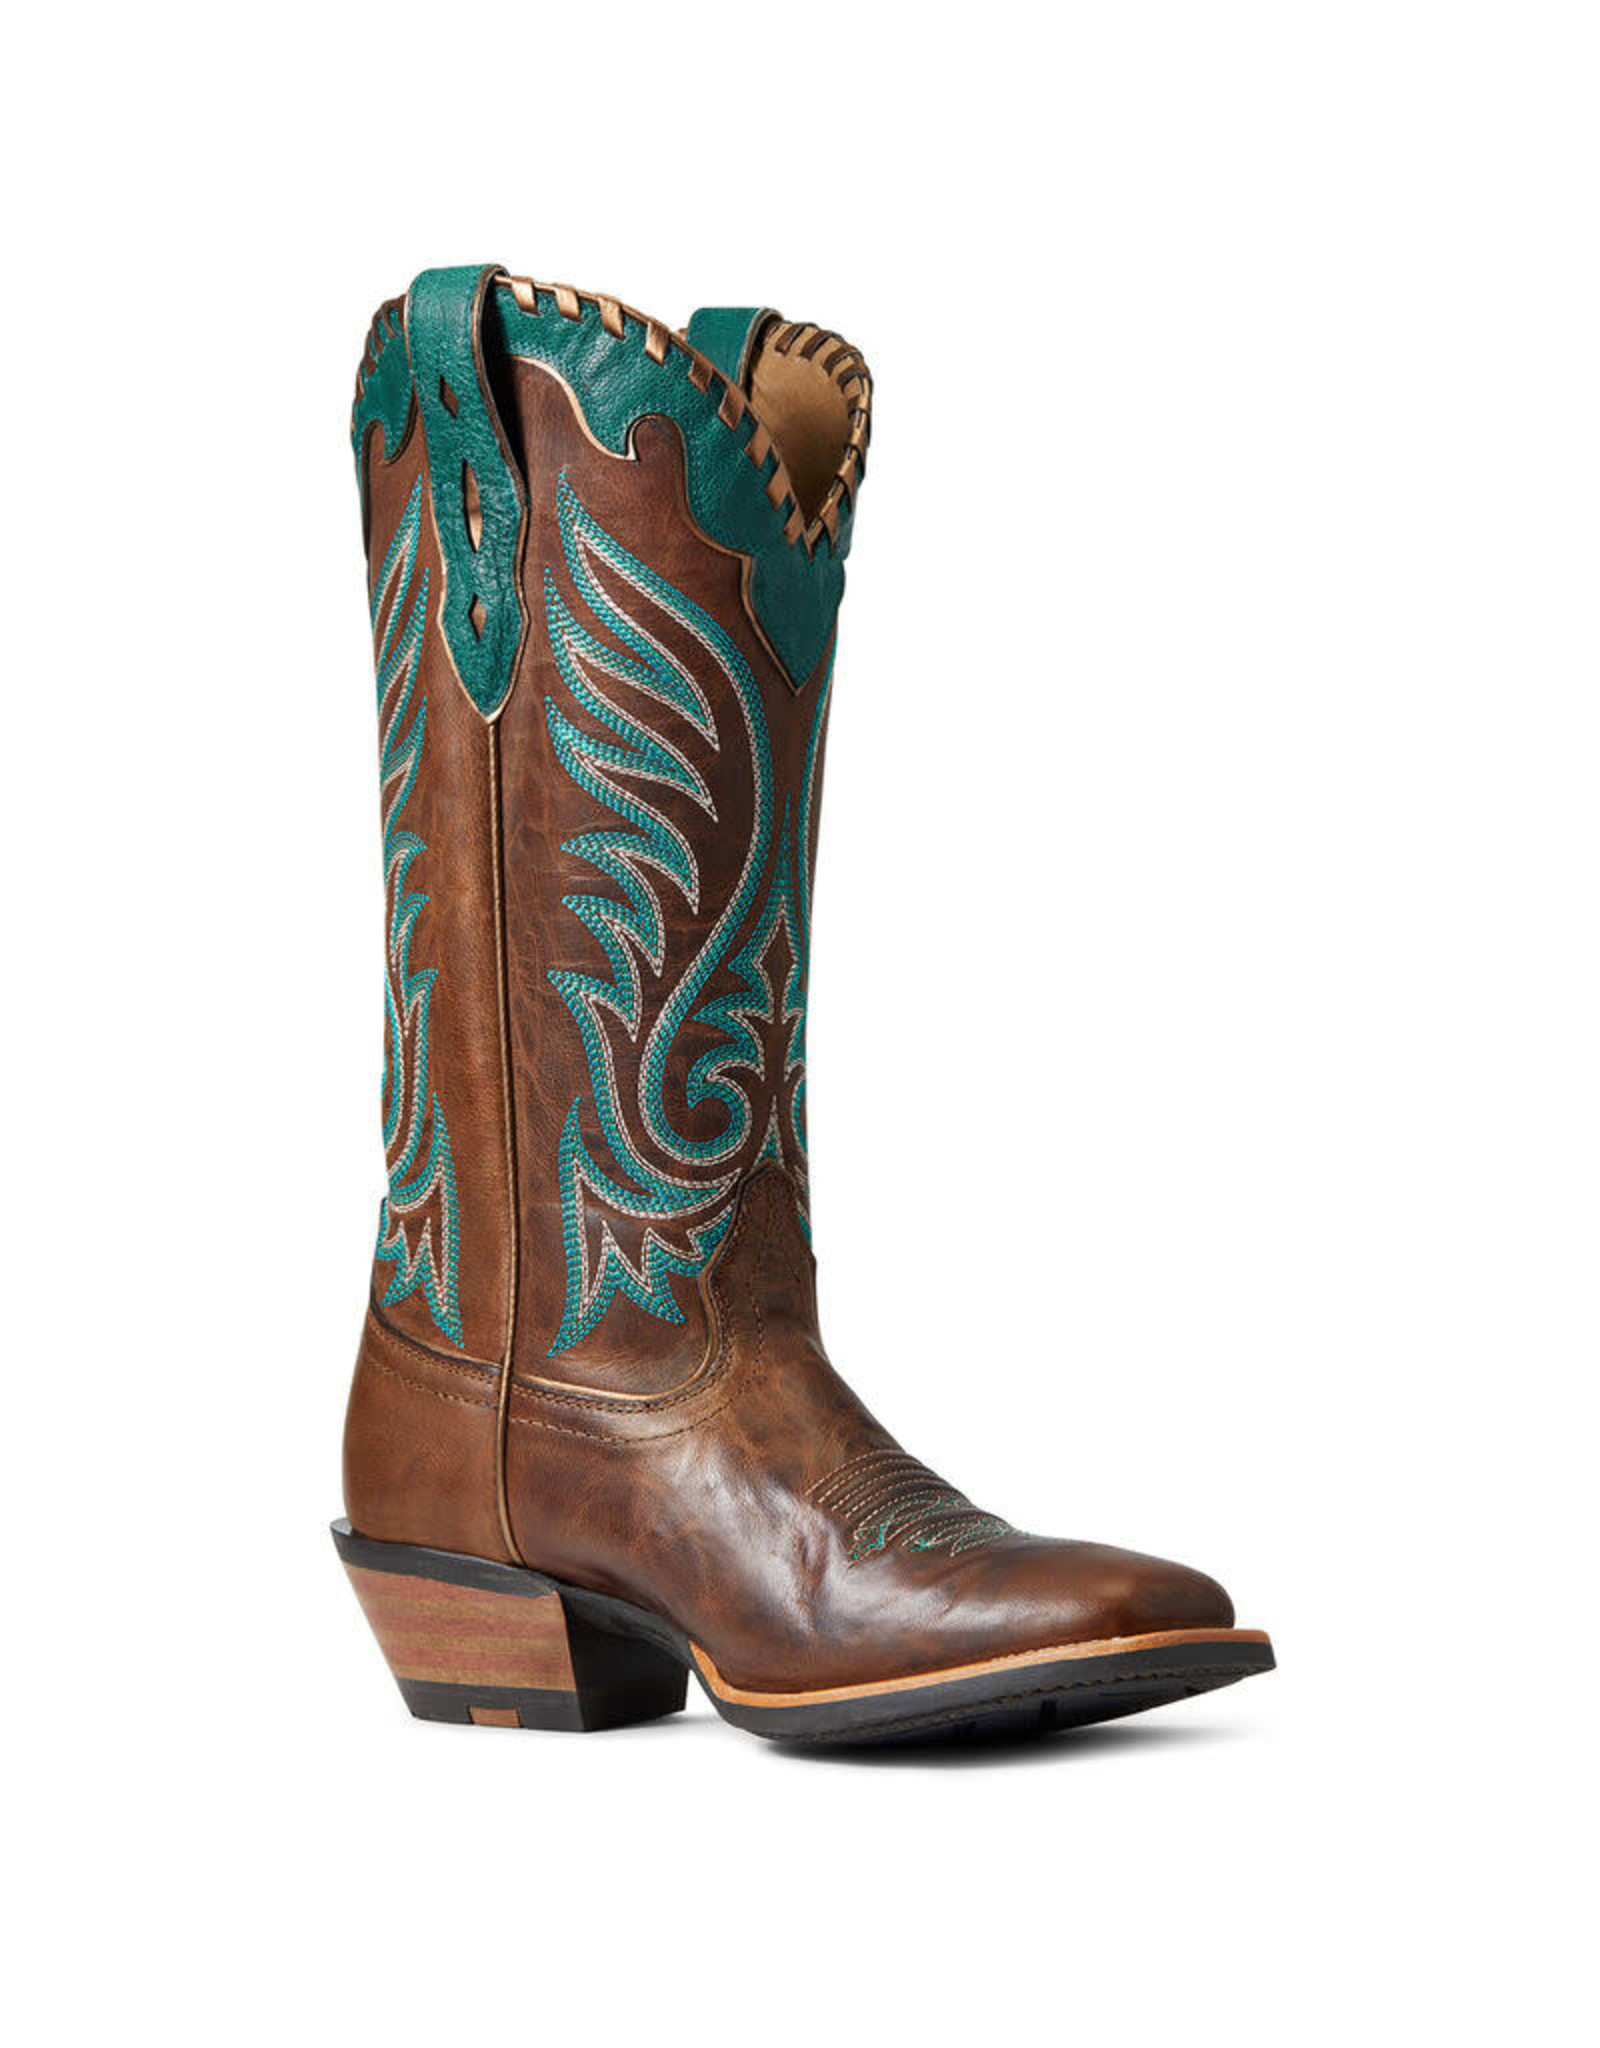 Ariat Ladies Crossfire Picante 10040371 Western Boots